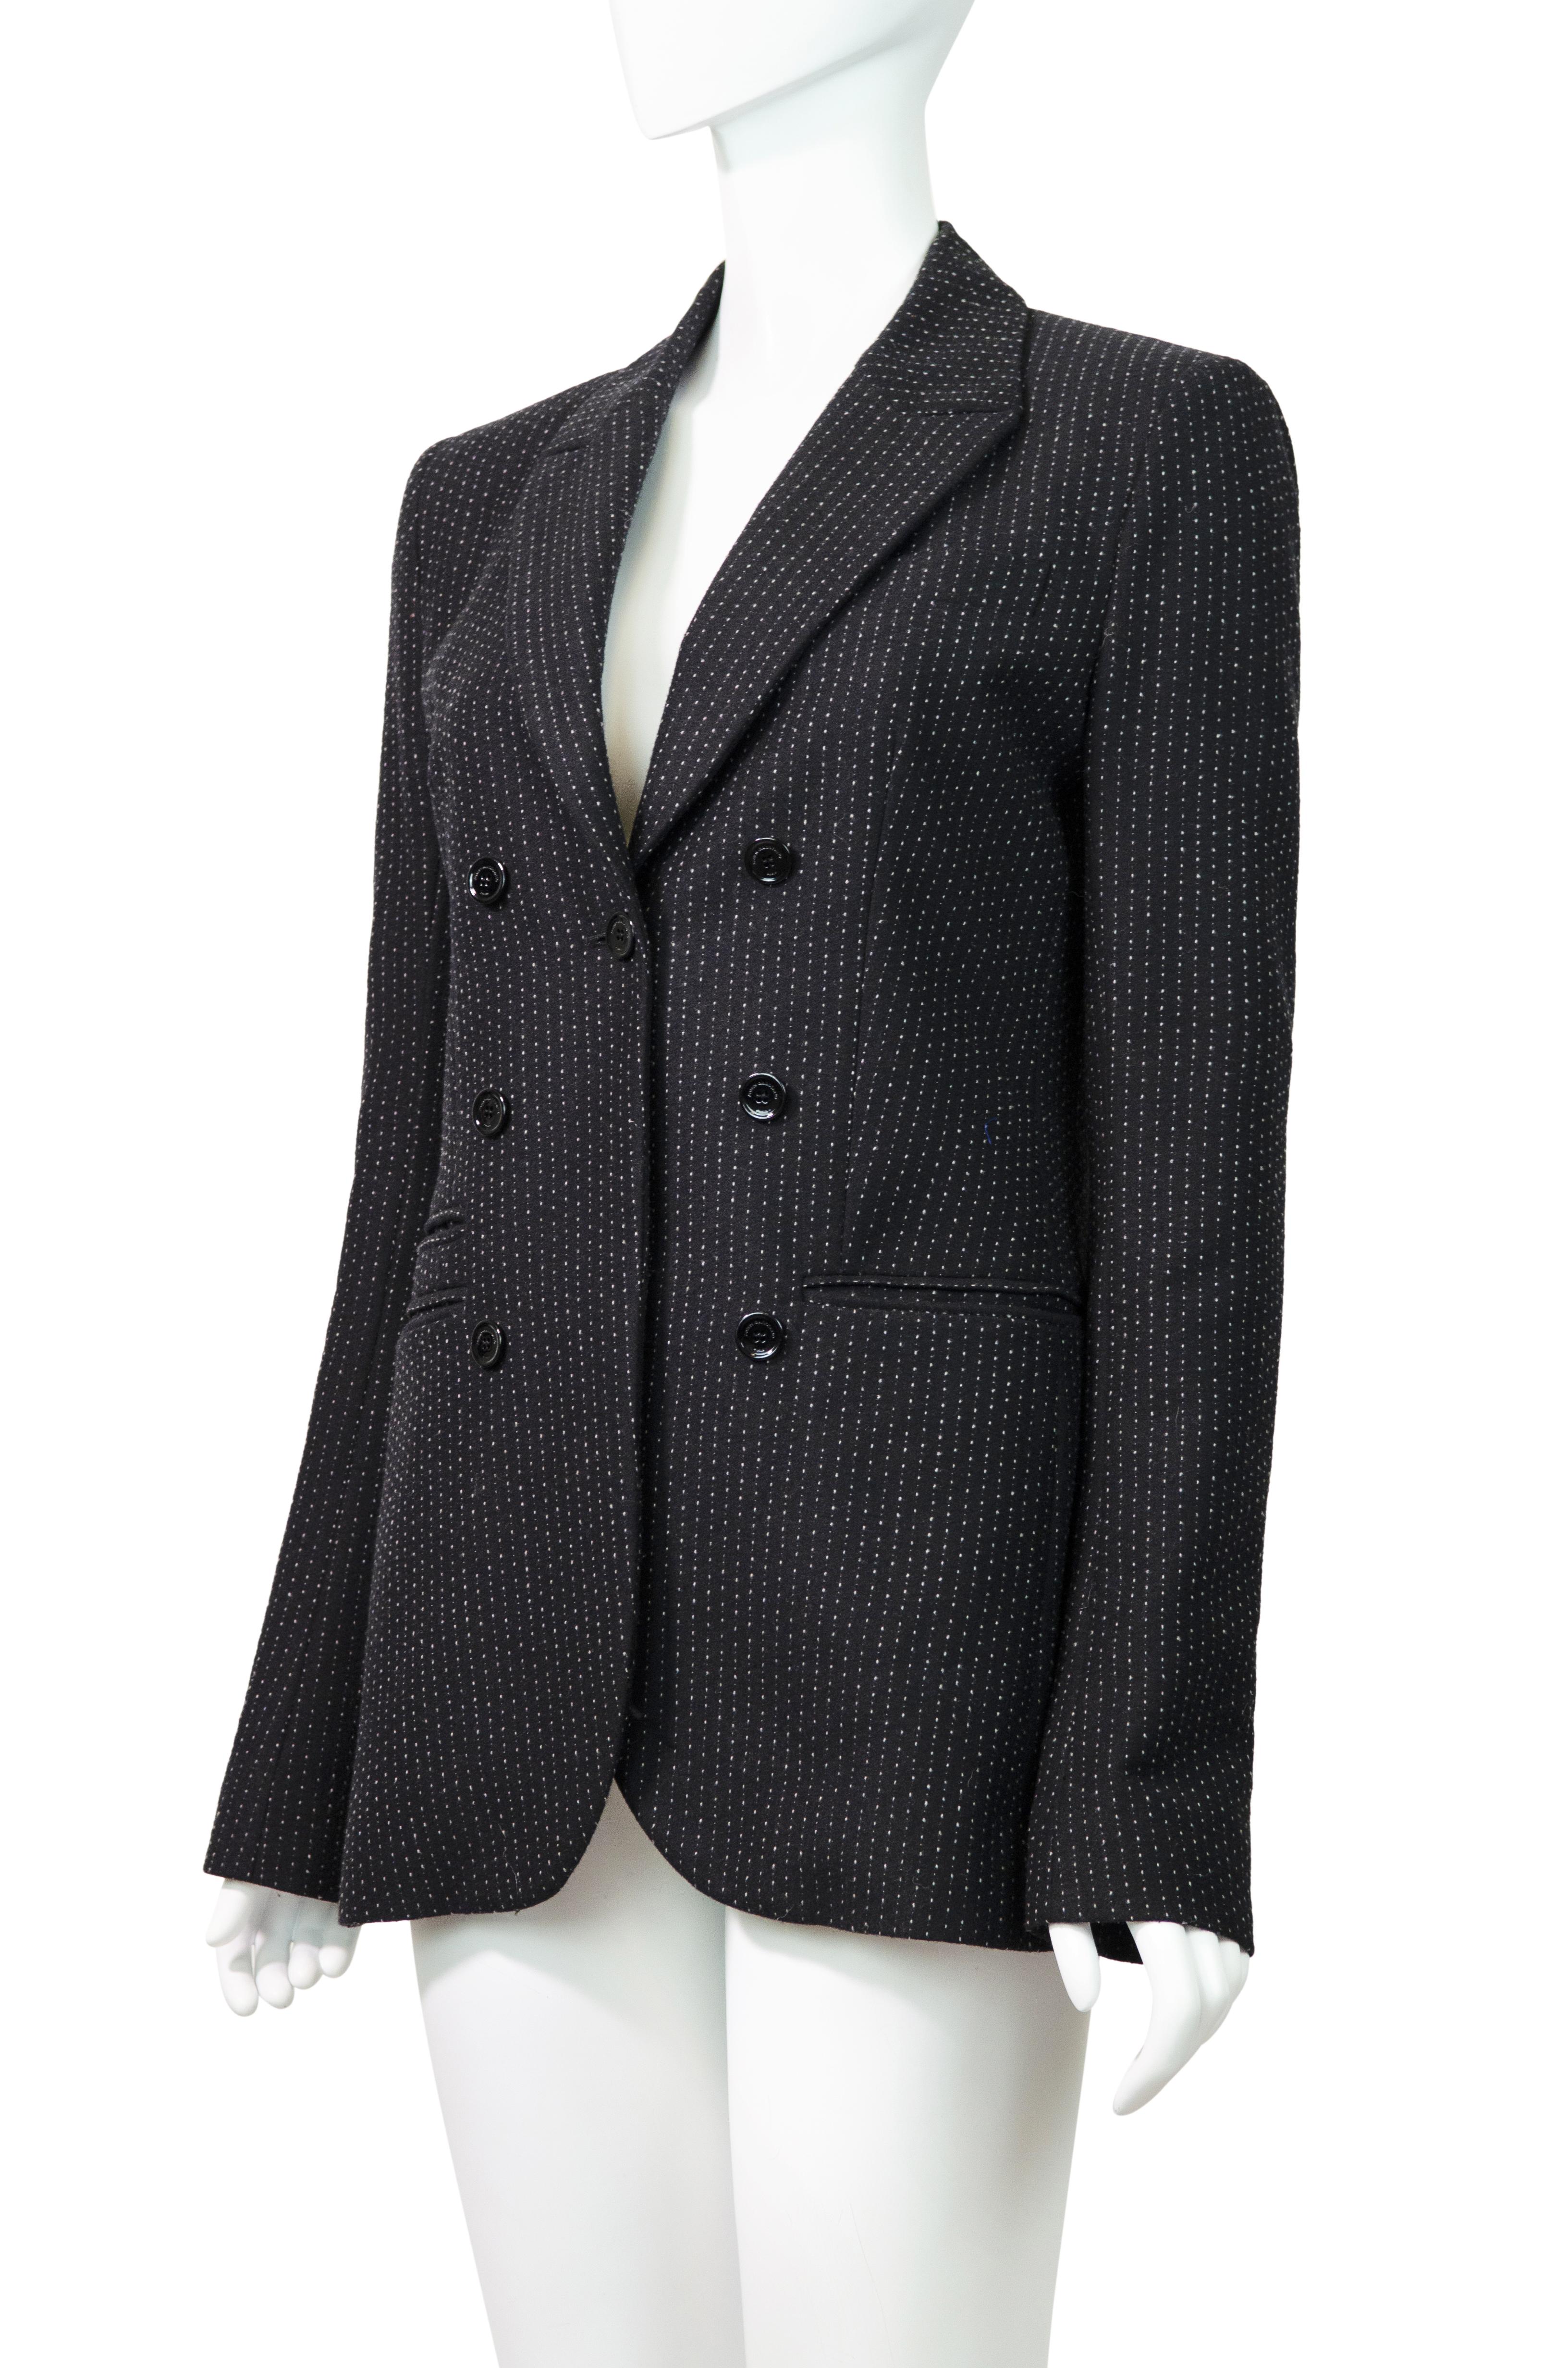 Elegant and versatile polkadot blazer by John Galliano from their Fall Winter 2017 collection.

A true wardrobe staple, This versatile piece is made from a soft wool with a chic micro polka-dot pattern, and features a V neck-line, a single breasted